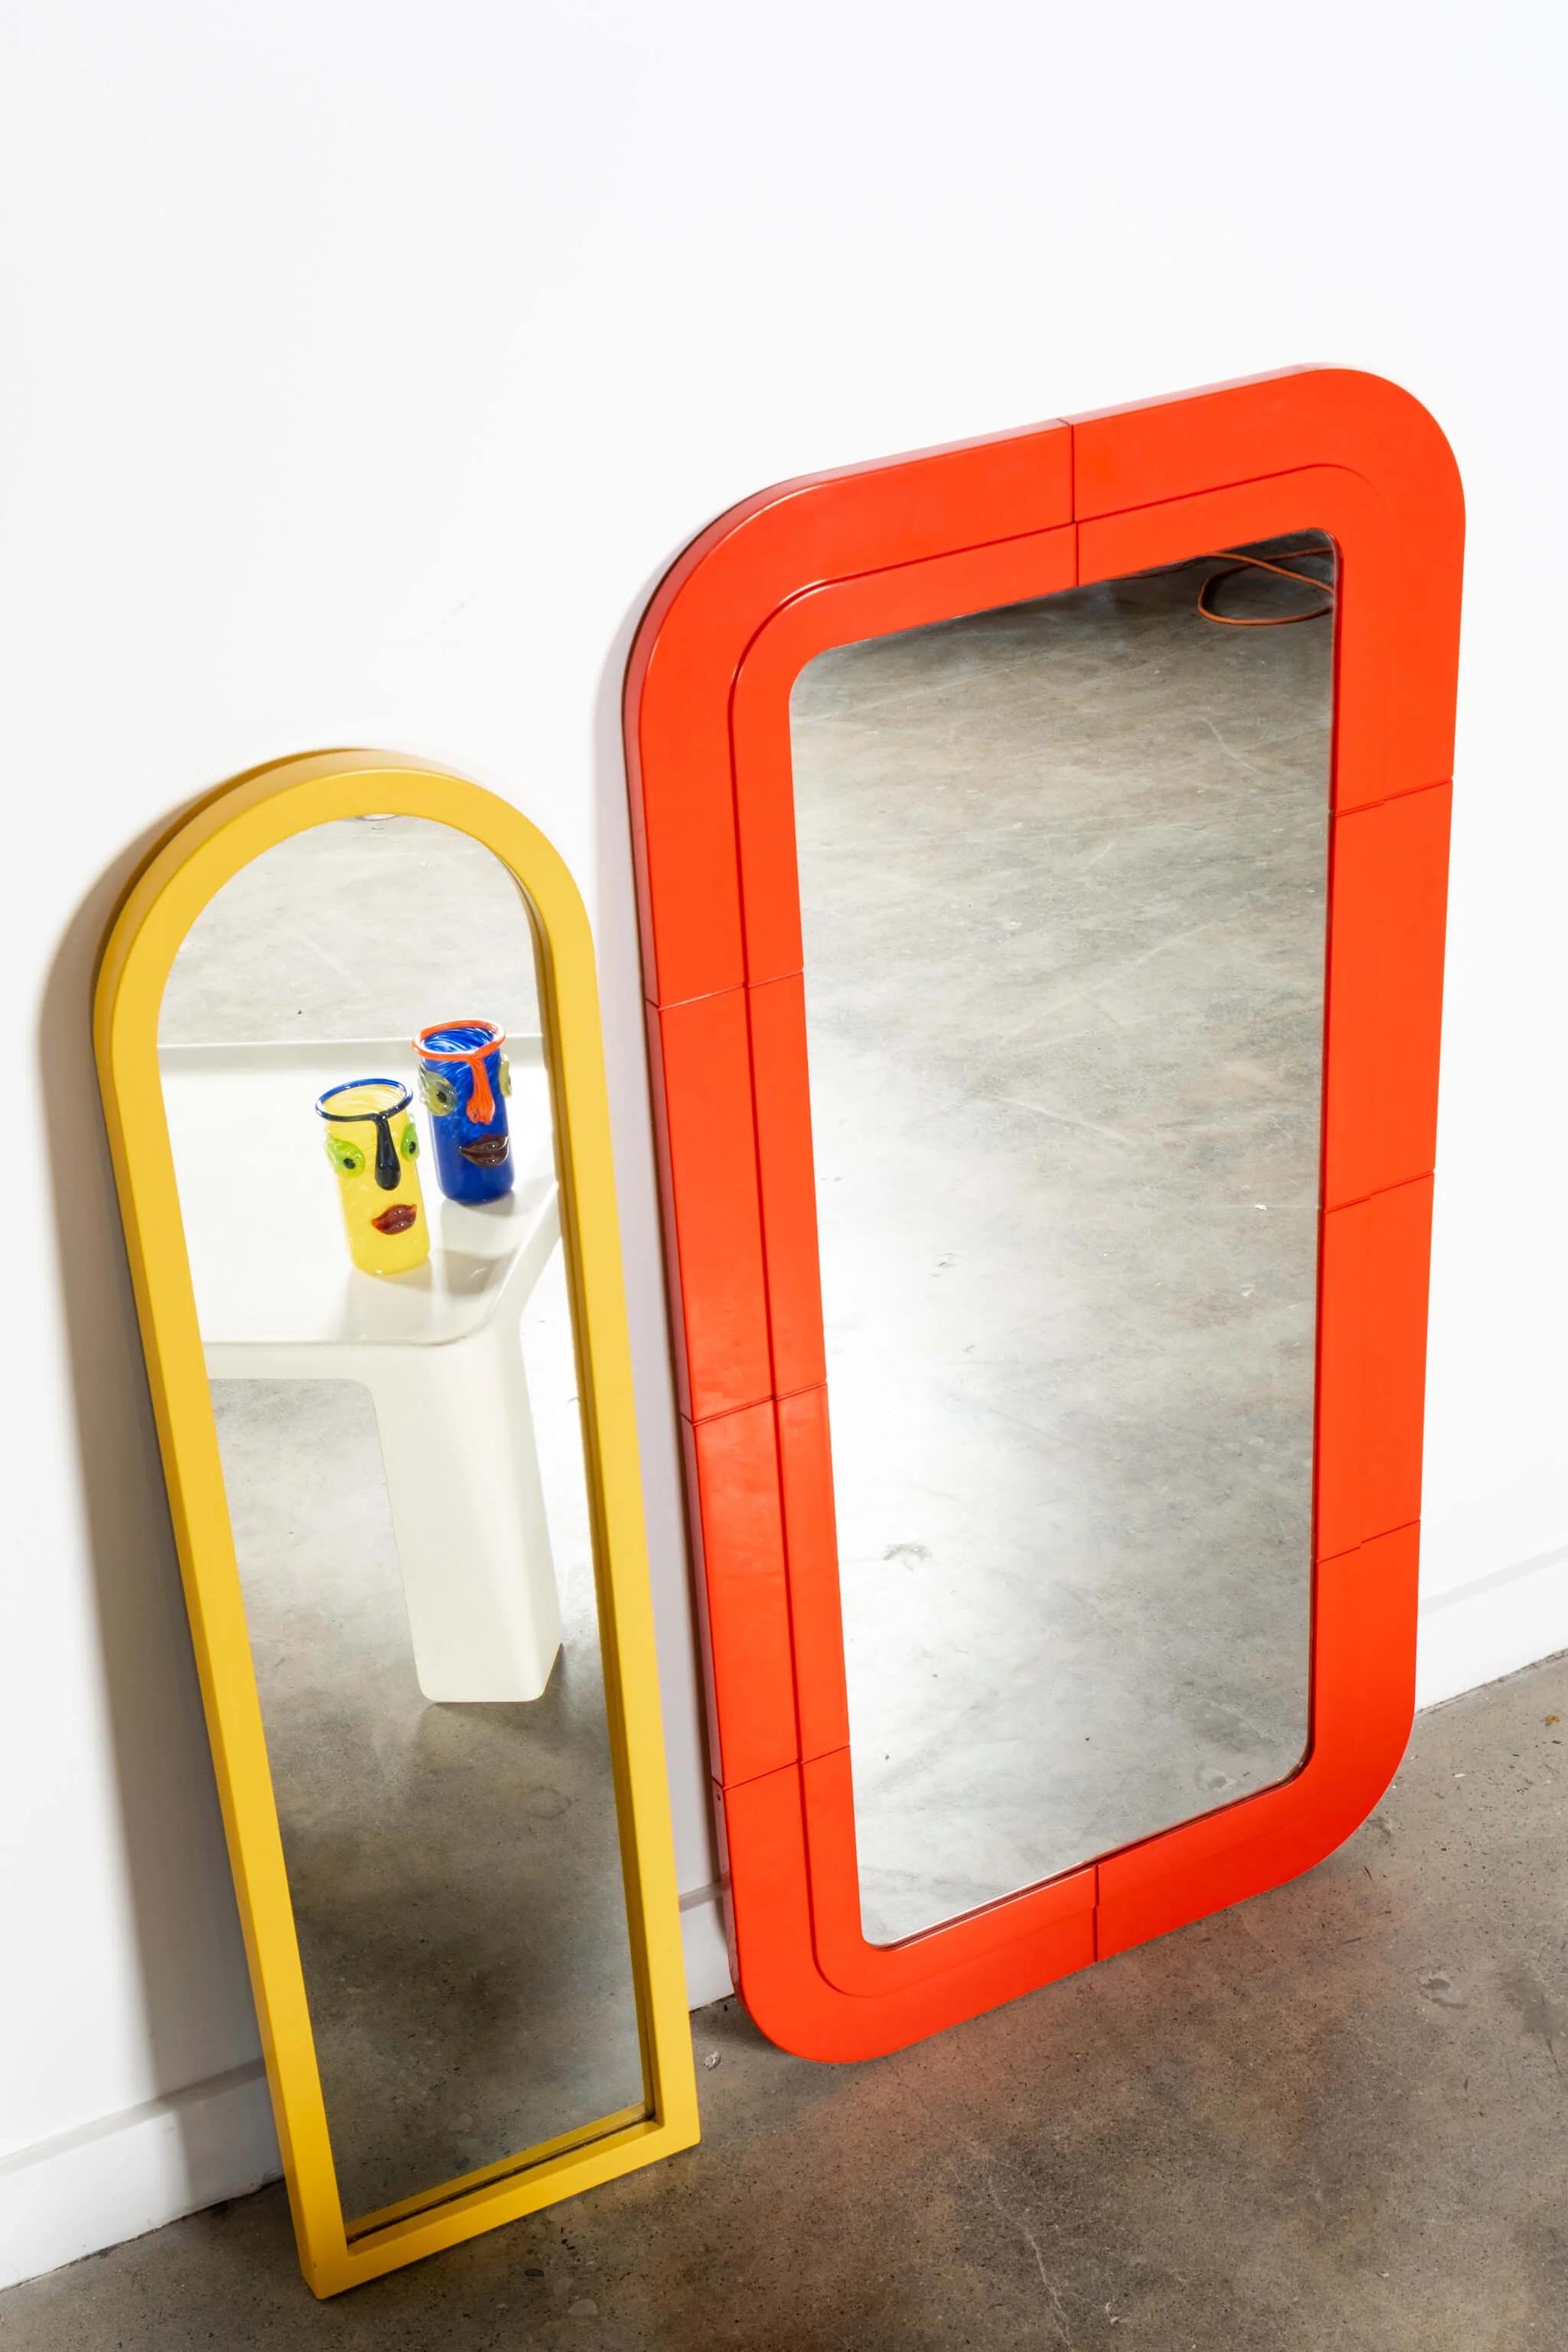 Moulded plastic frame mirror in bright cherry red, by designer Anna Castelli Ferrieri for Kartell. Attribution stamp on back of piece shows 'Made in Italy'.